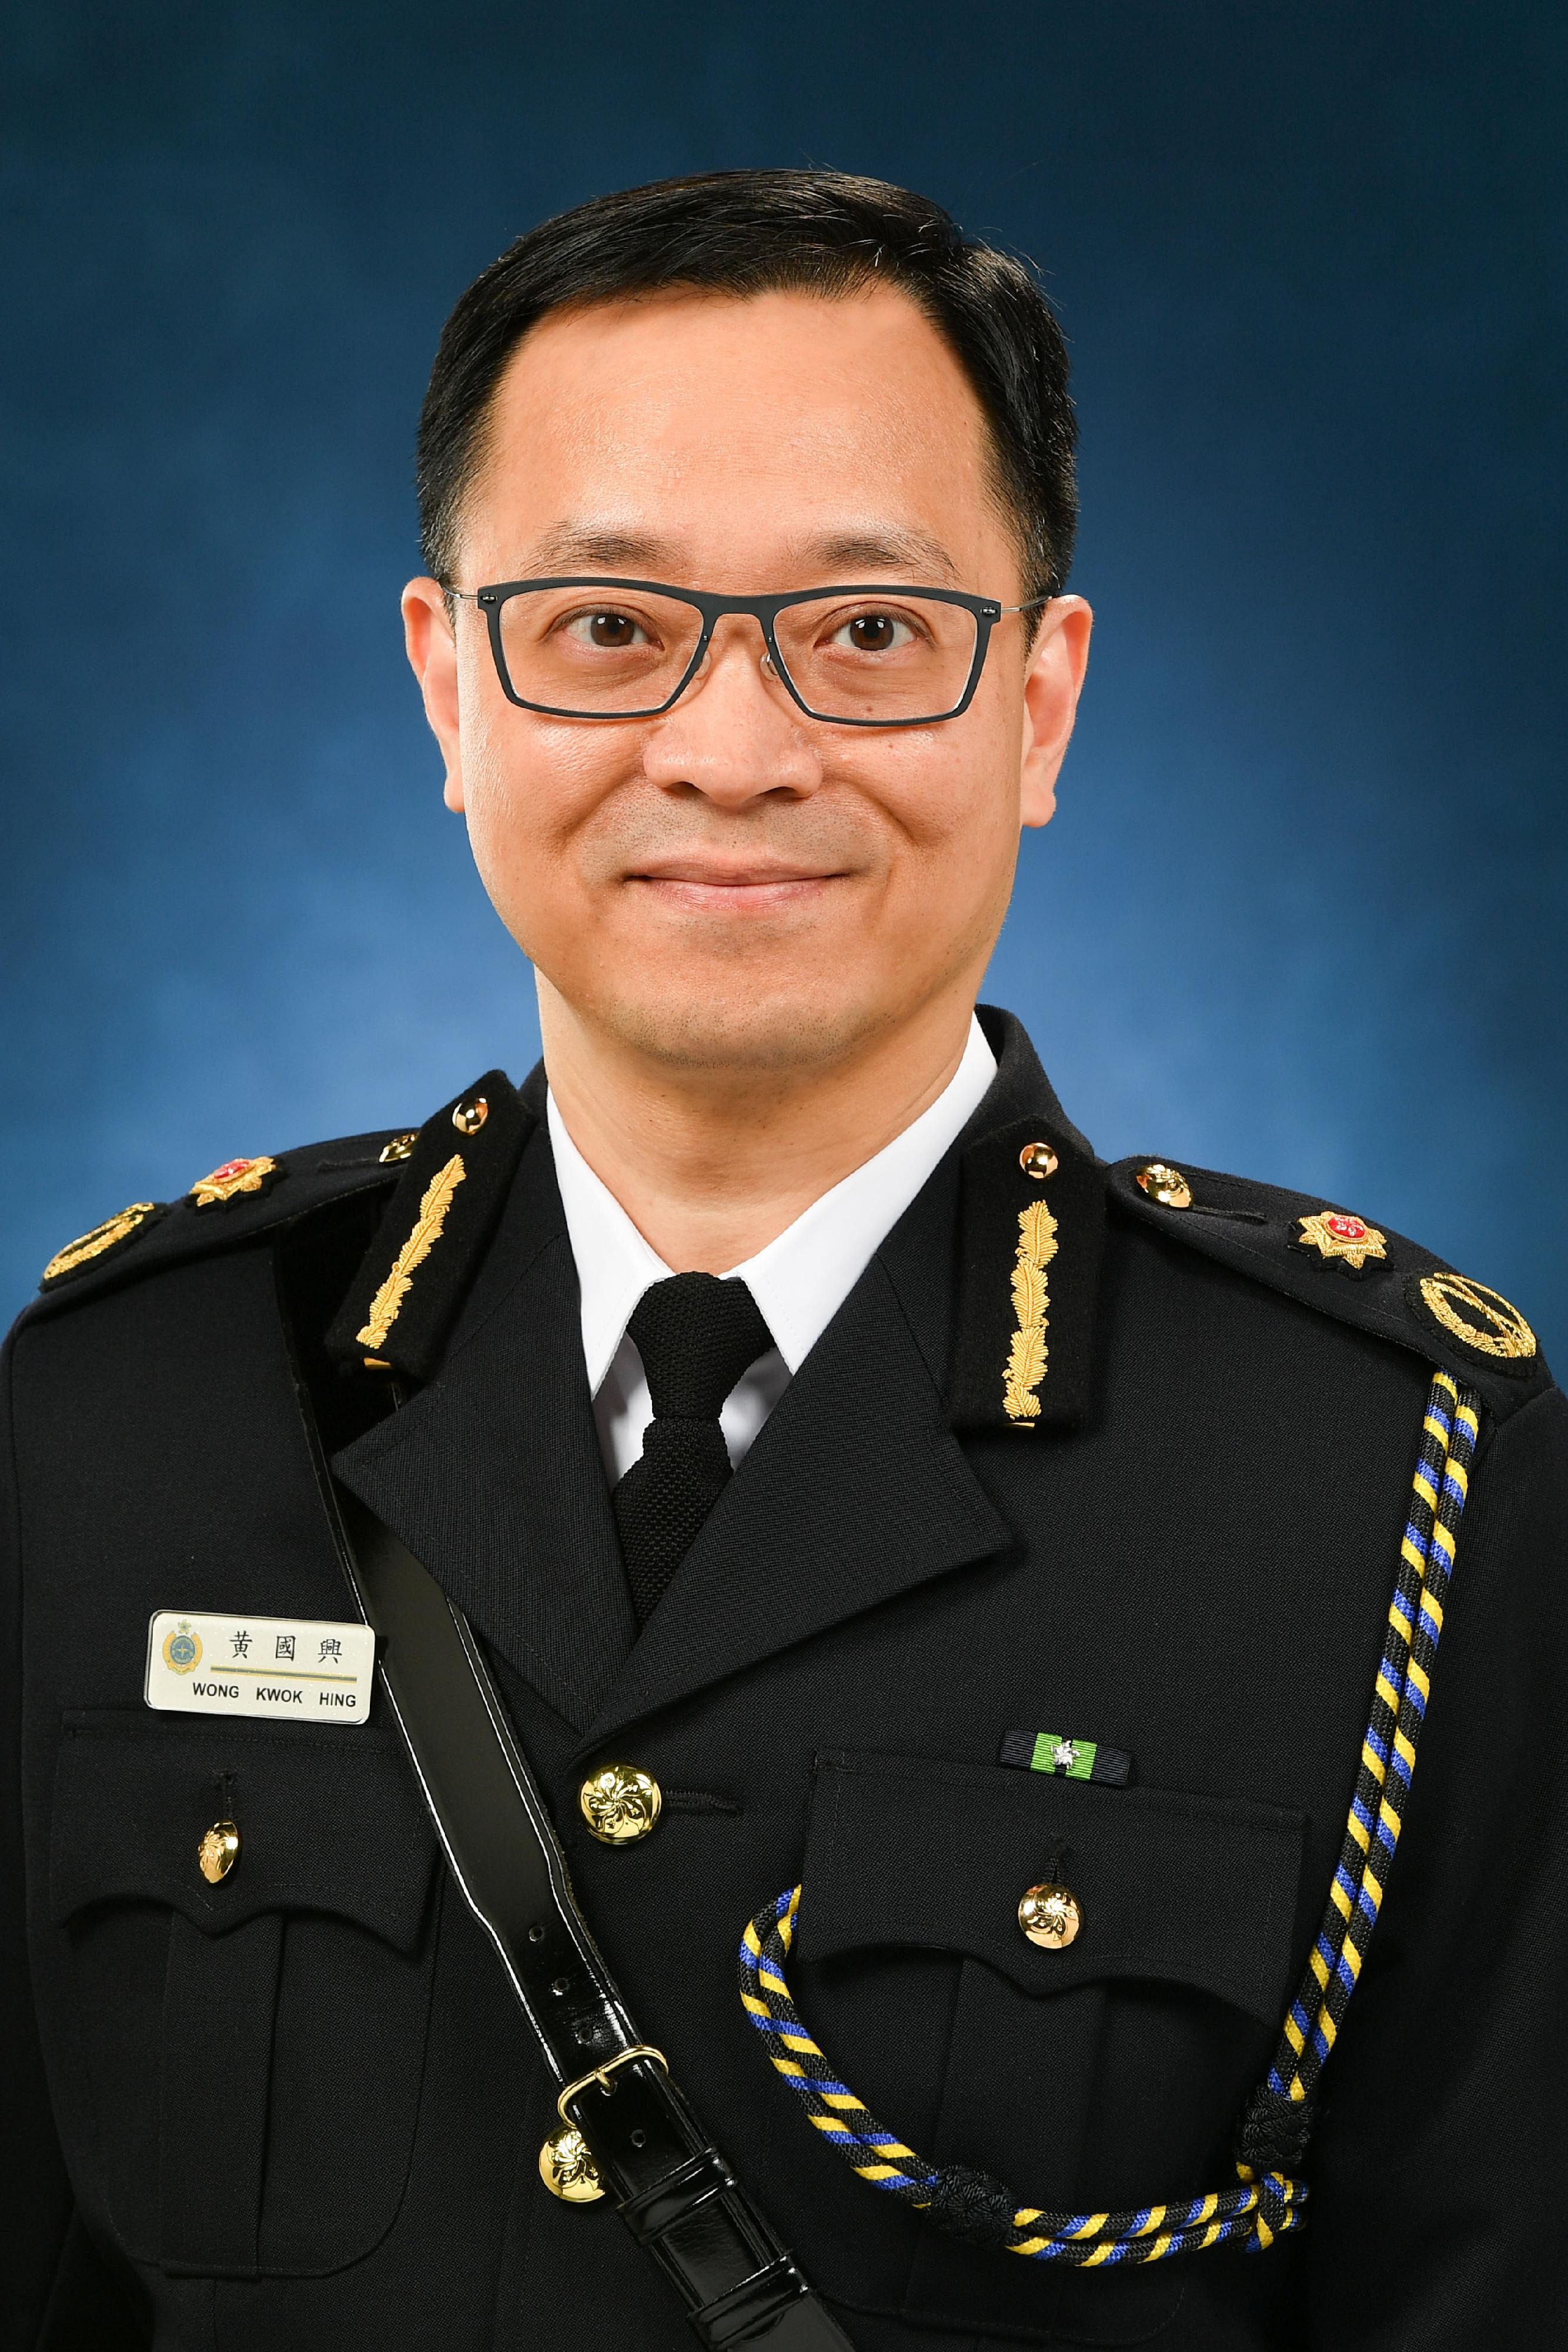 Mr Wong Kwok-hing, Deputy Commissioner of Correctional Services, will take up the post of Commissioner of Correctional Services on March 24, 2022.